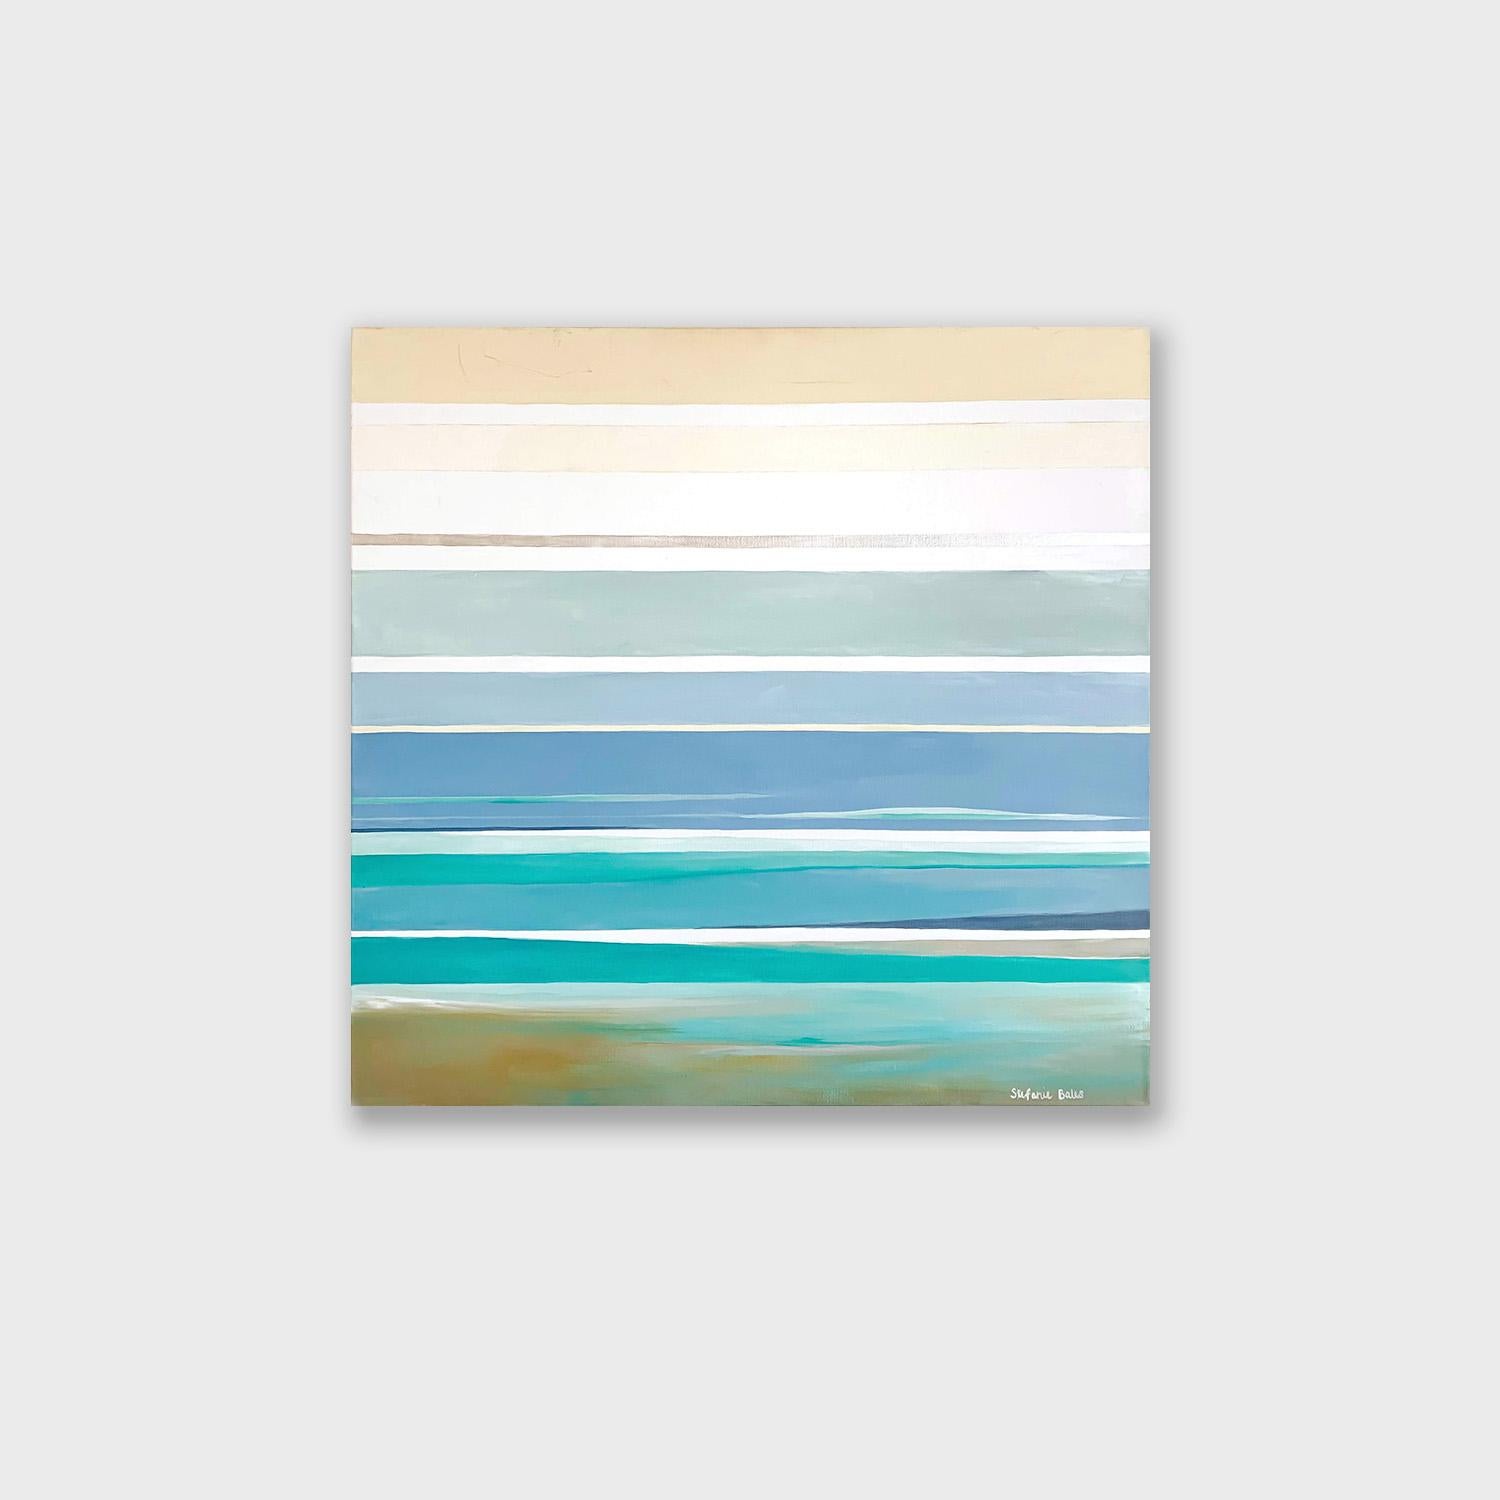 Stefanie Bales Abstract Painting - An Abstract Acrylic on Canvas Painting, "Marine"